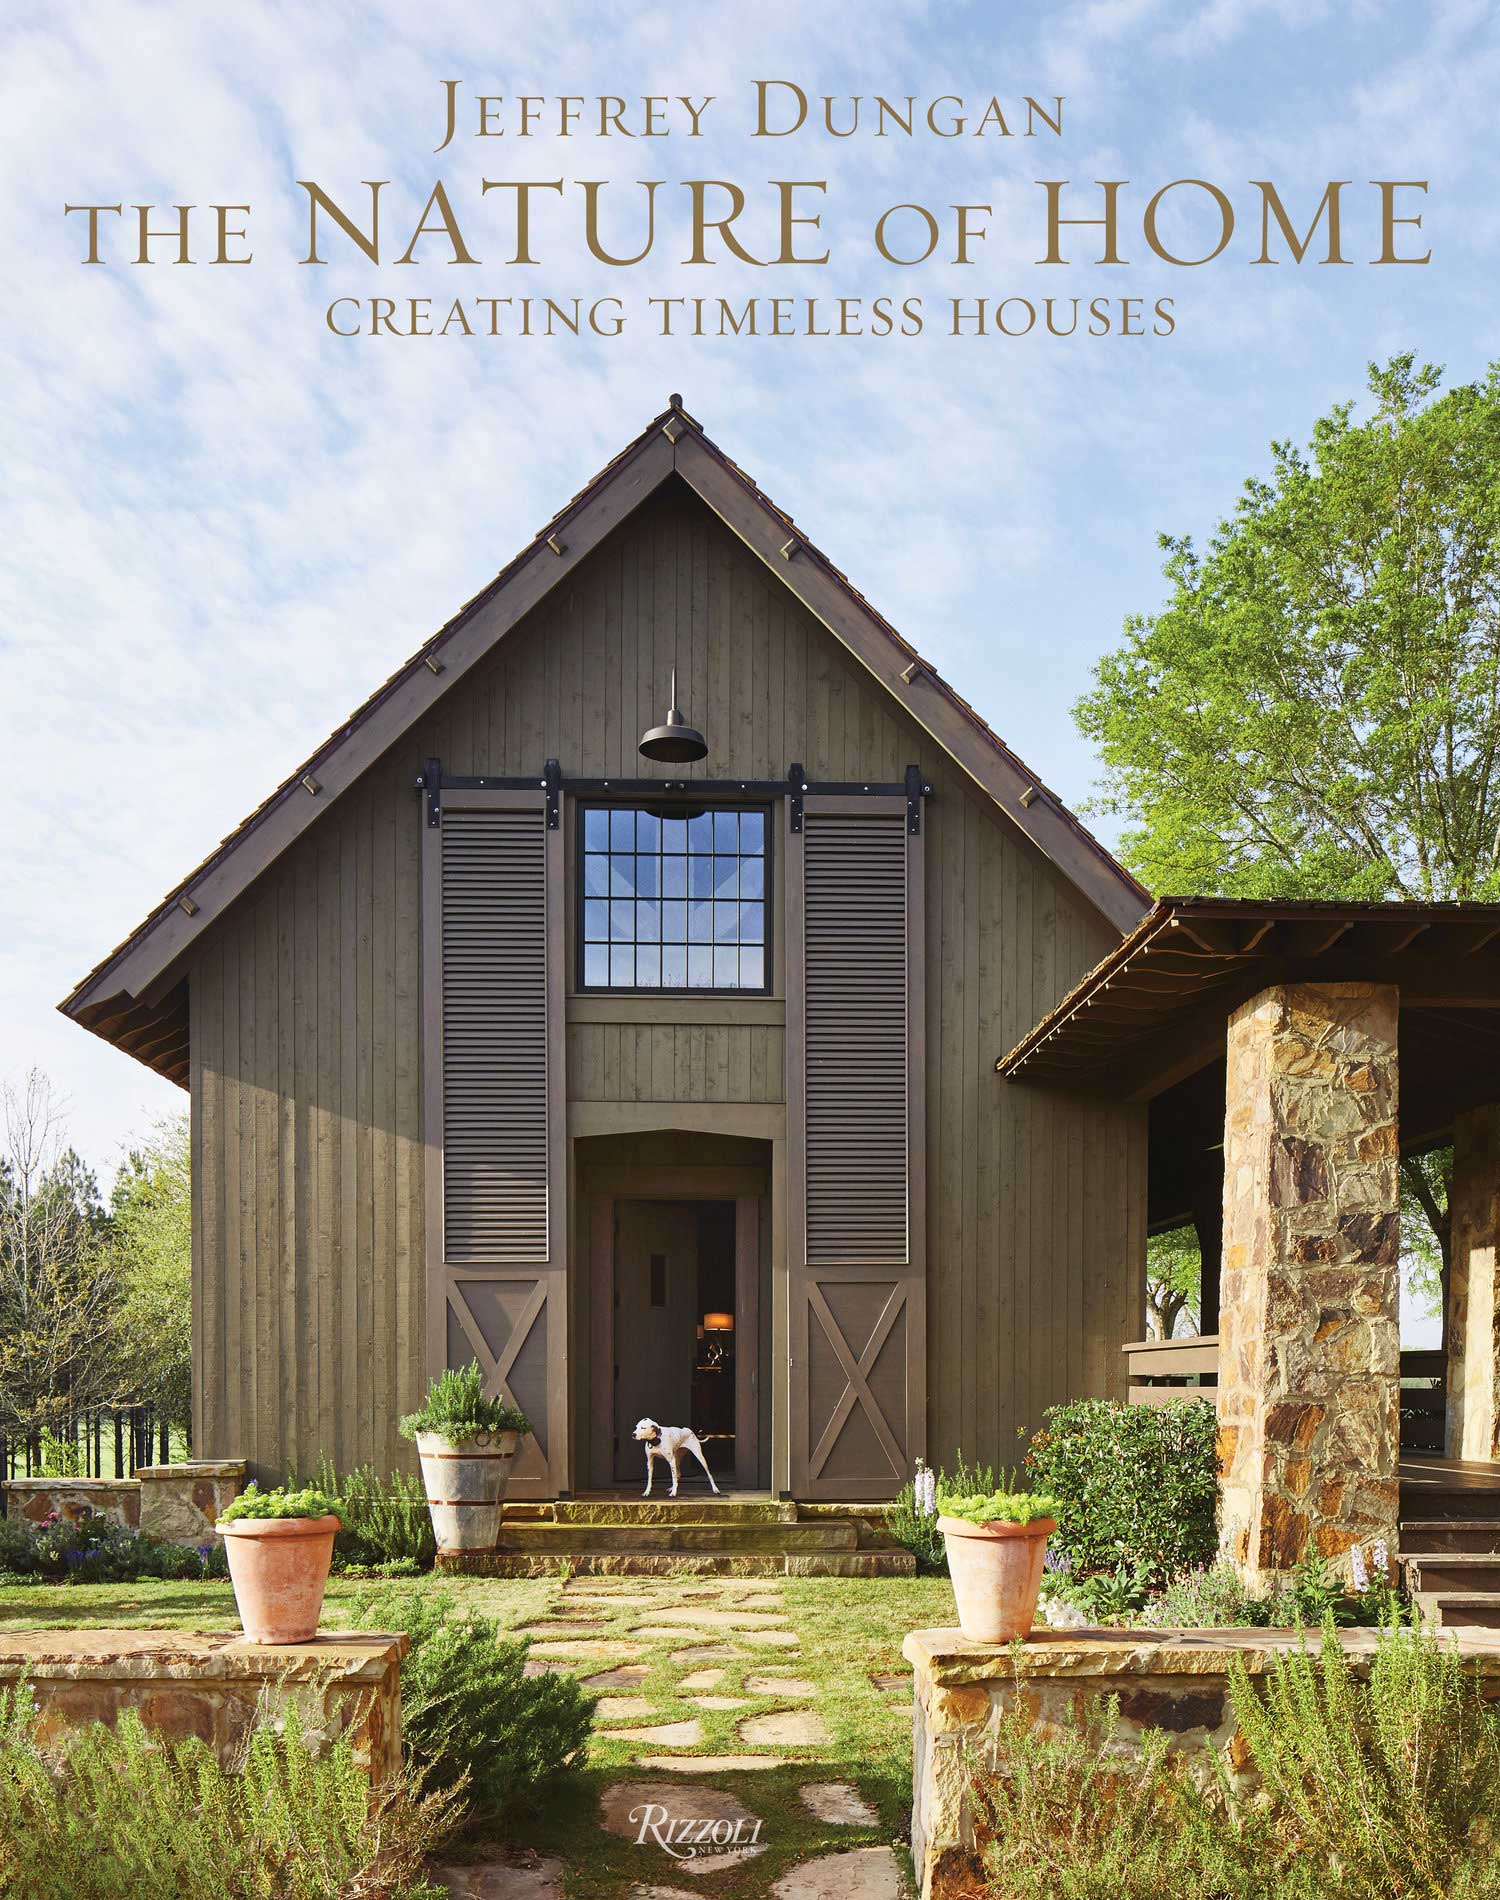 The Nature of Home book cover